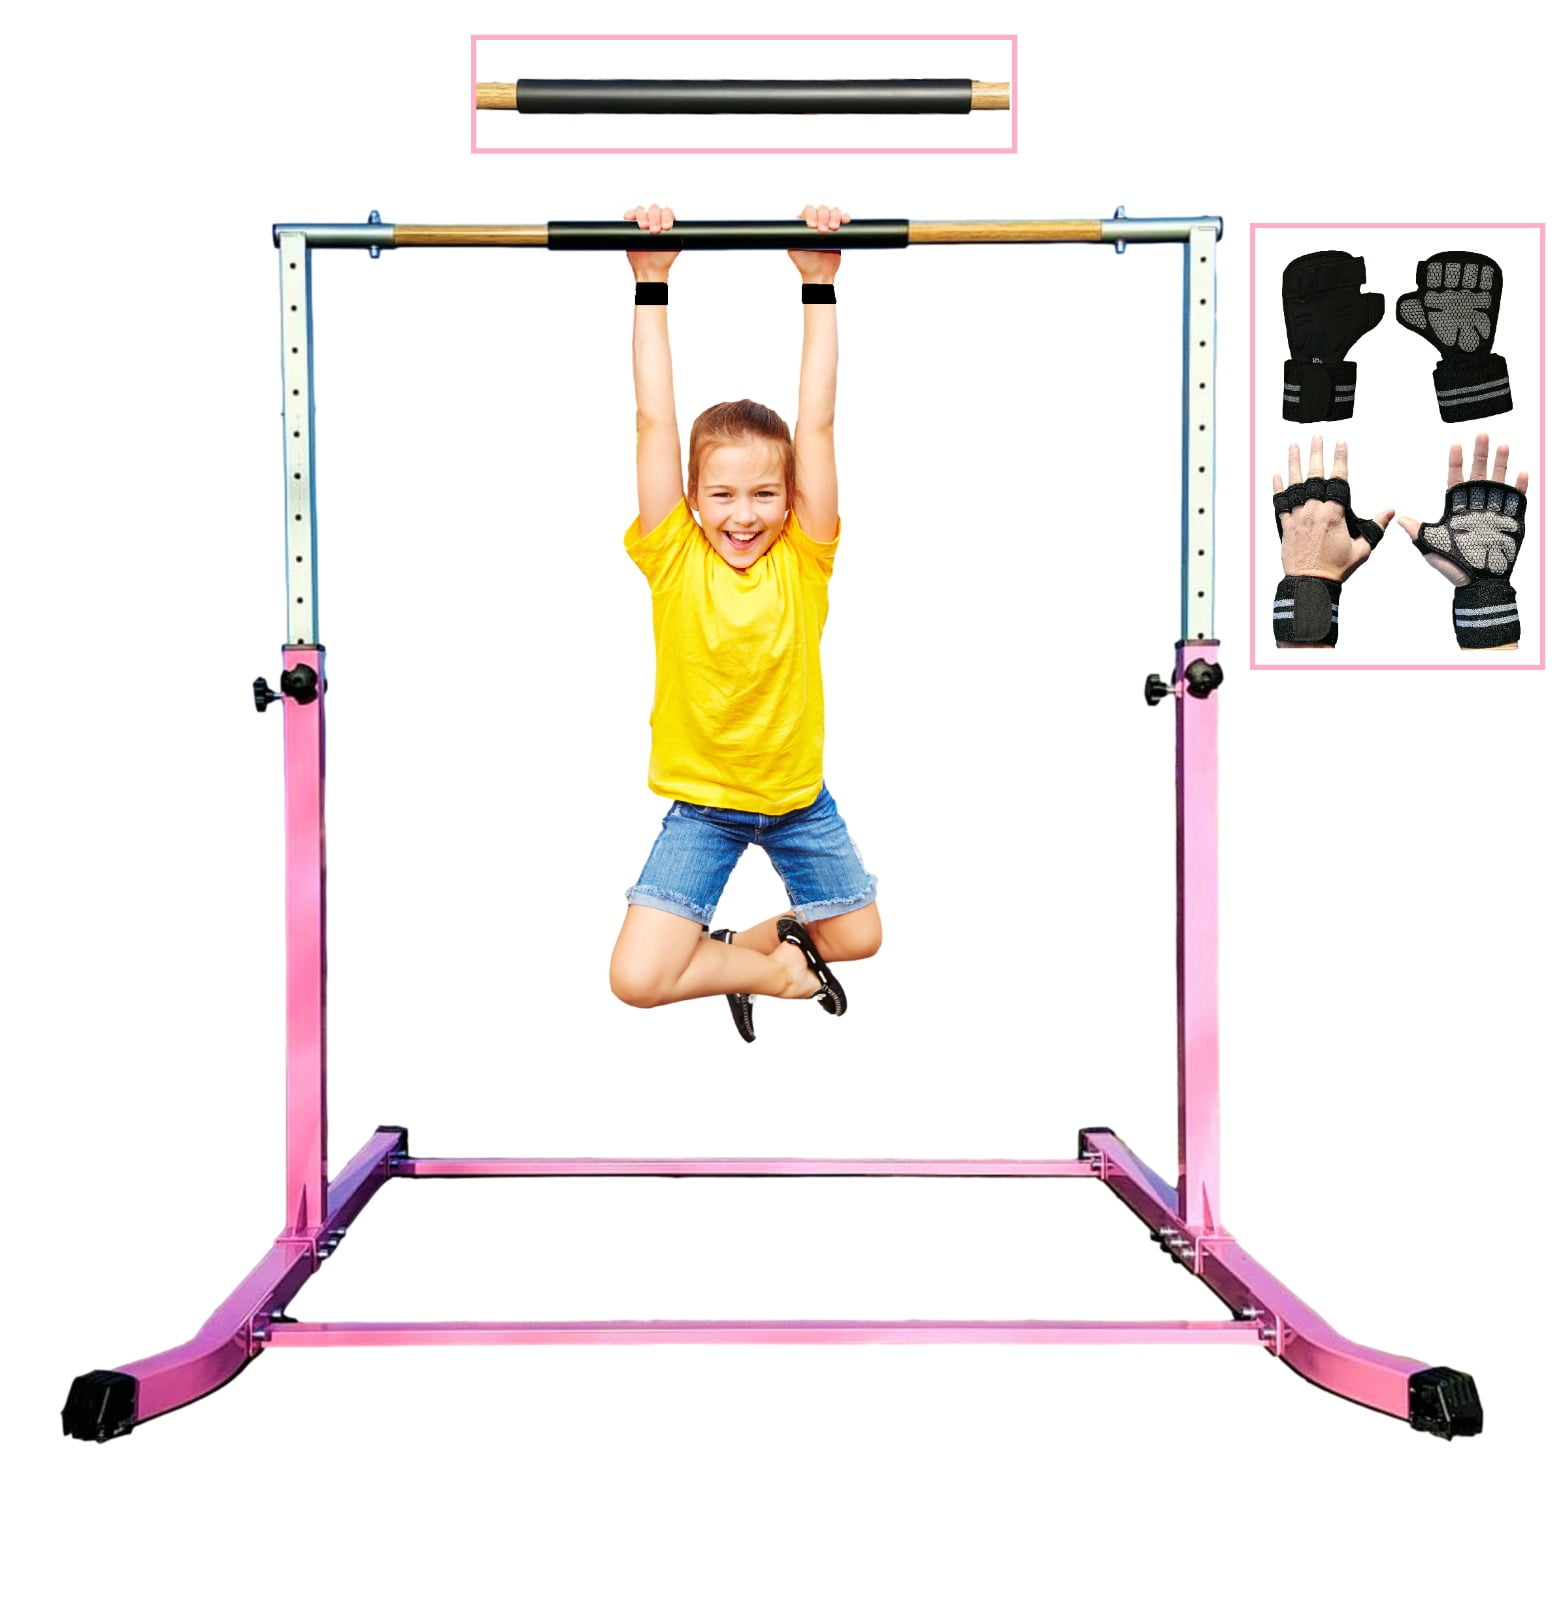 Foldable & Movable Gymnastics Kip Bar,Horizontal Bar for Kids Girls Junior,No Wobble Gym Equipment for Home Indoor,3' to 5' Adjustable Height,Gymnasts 1-4 Levels,300 lbs Weight Capacity Purple 